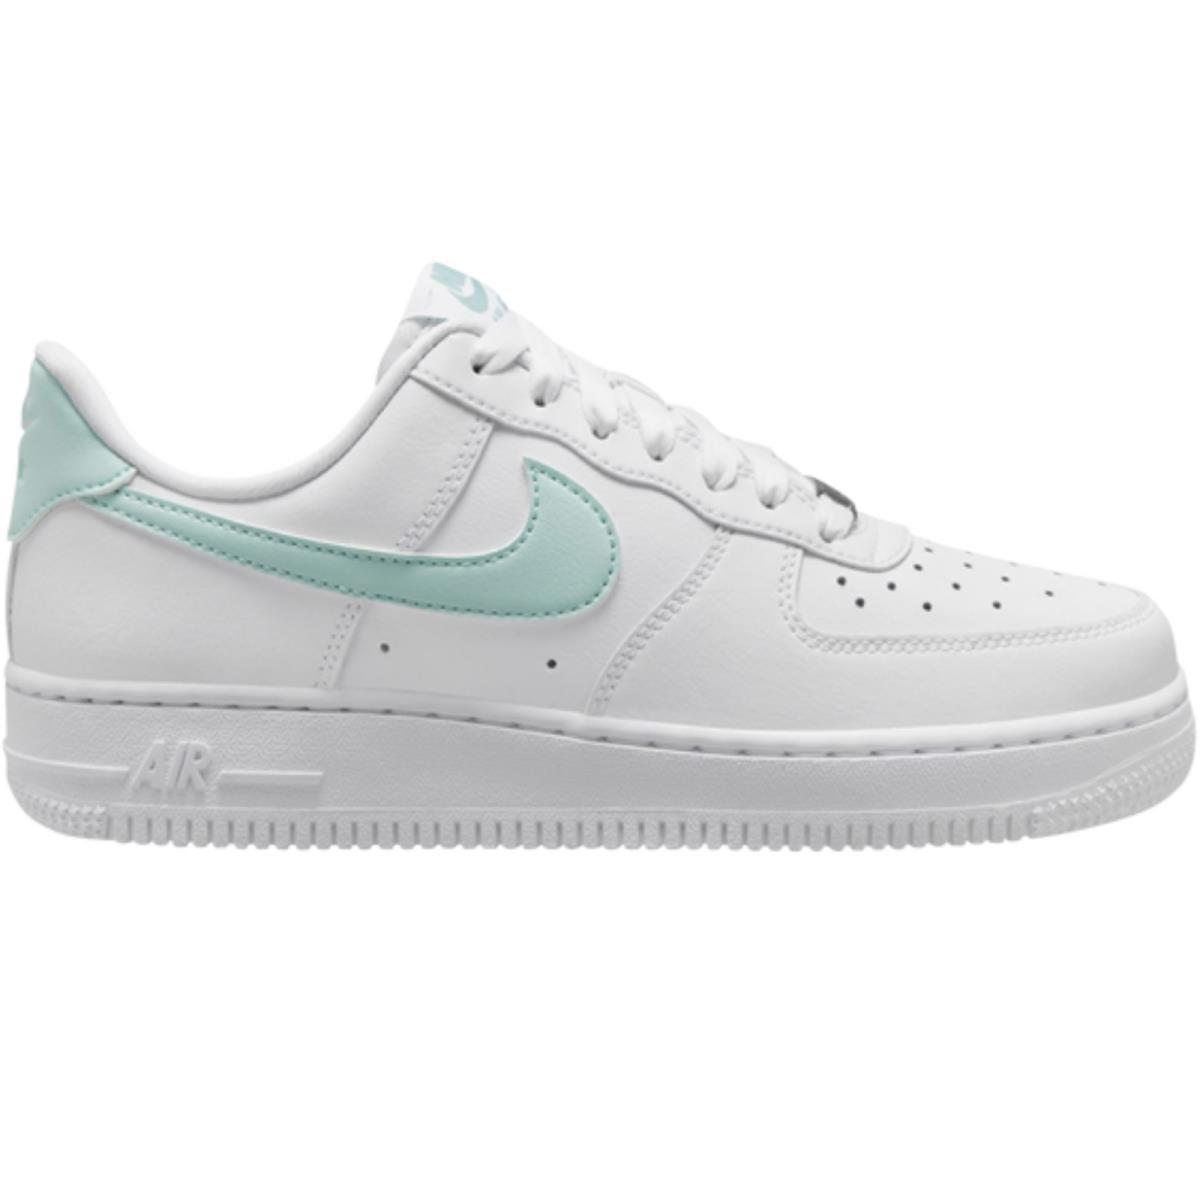 Nike Air Force 1 Women`s Casual Shoes All Colors US Sizes 6-11 White/Jade Ice